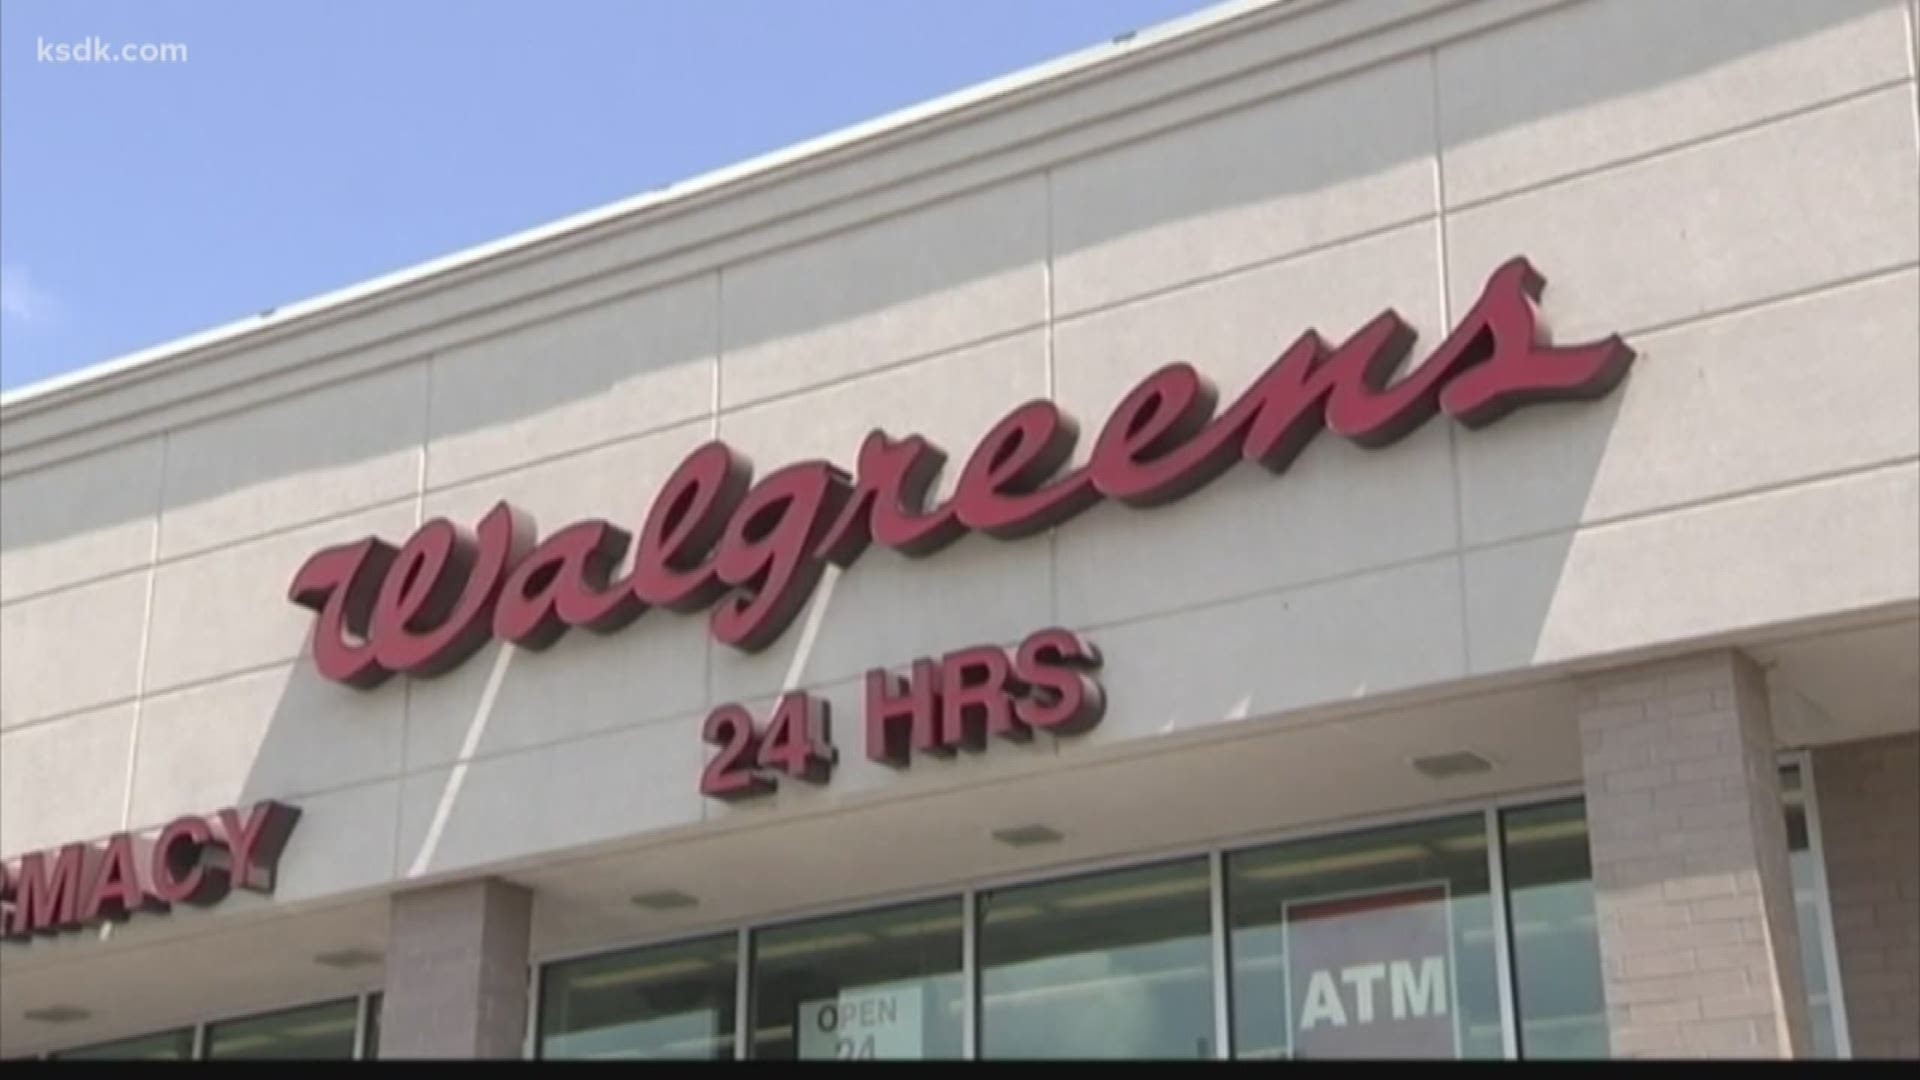 Walgreens has decided to raise its minimum age for tobacco sales several weeks after a top federal official chastised the drugstore chain for violating laws restricting access to cigarettes and other tobacco products.